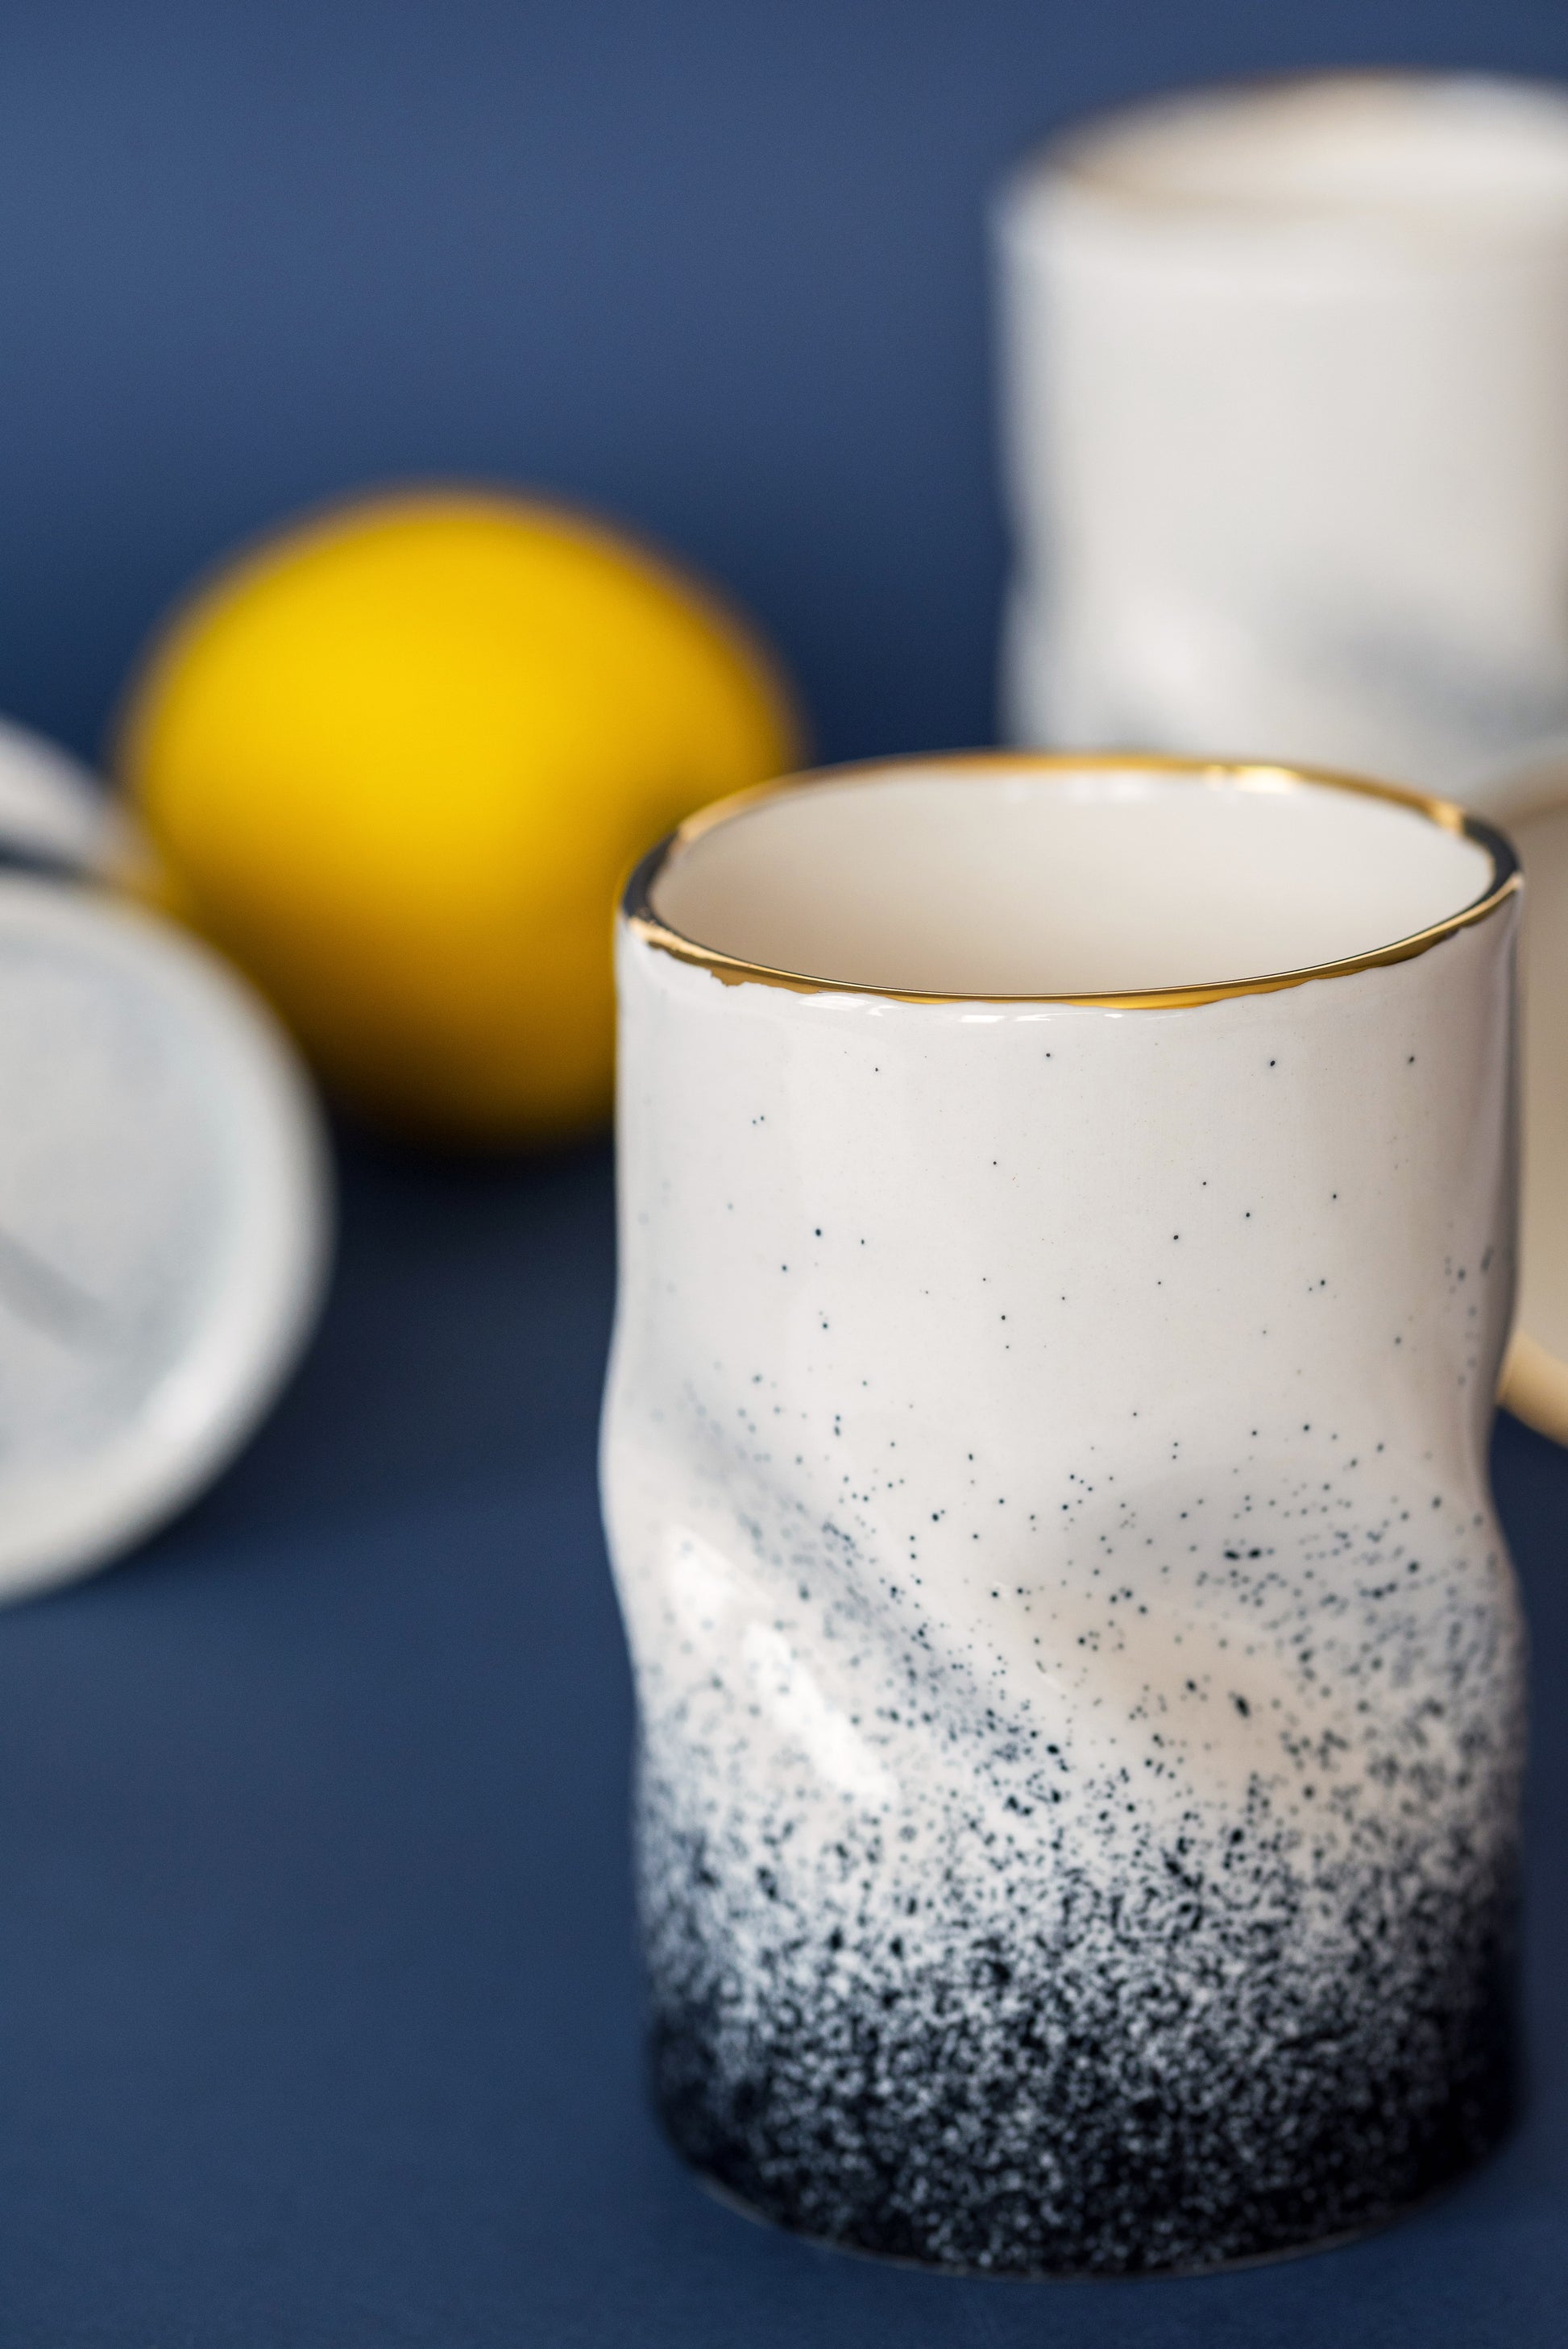 Porcelain cup CURVED GALAXY OMBRE - ZLATNAporcelain